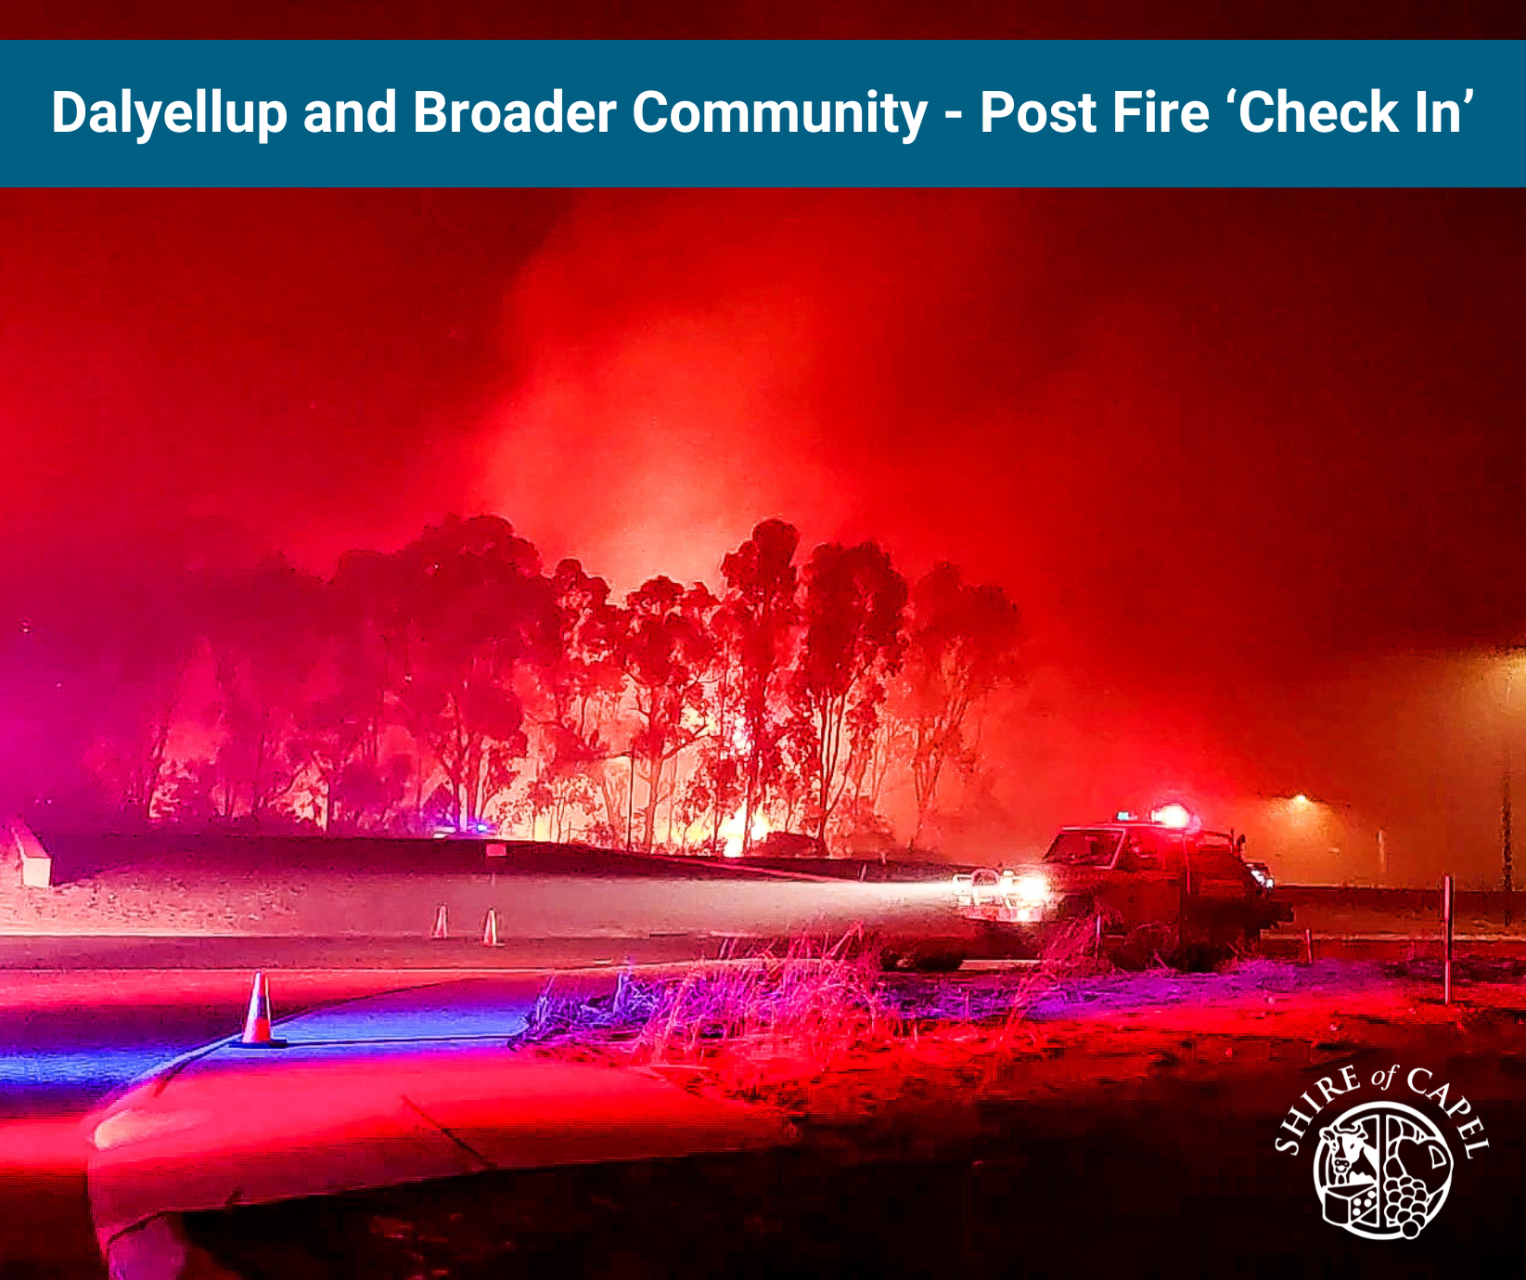 Dalyellup and Broader Community - Post Fire ‘Check In’